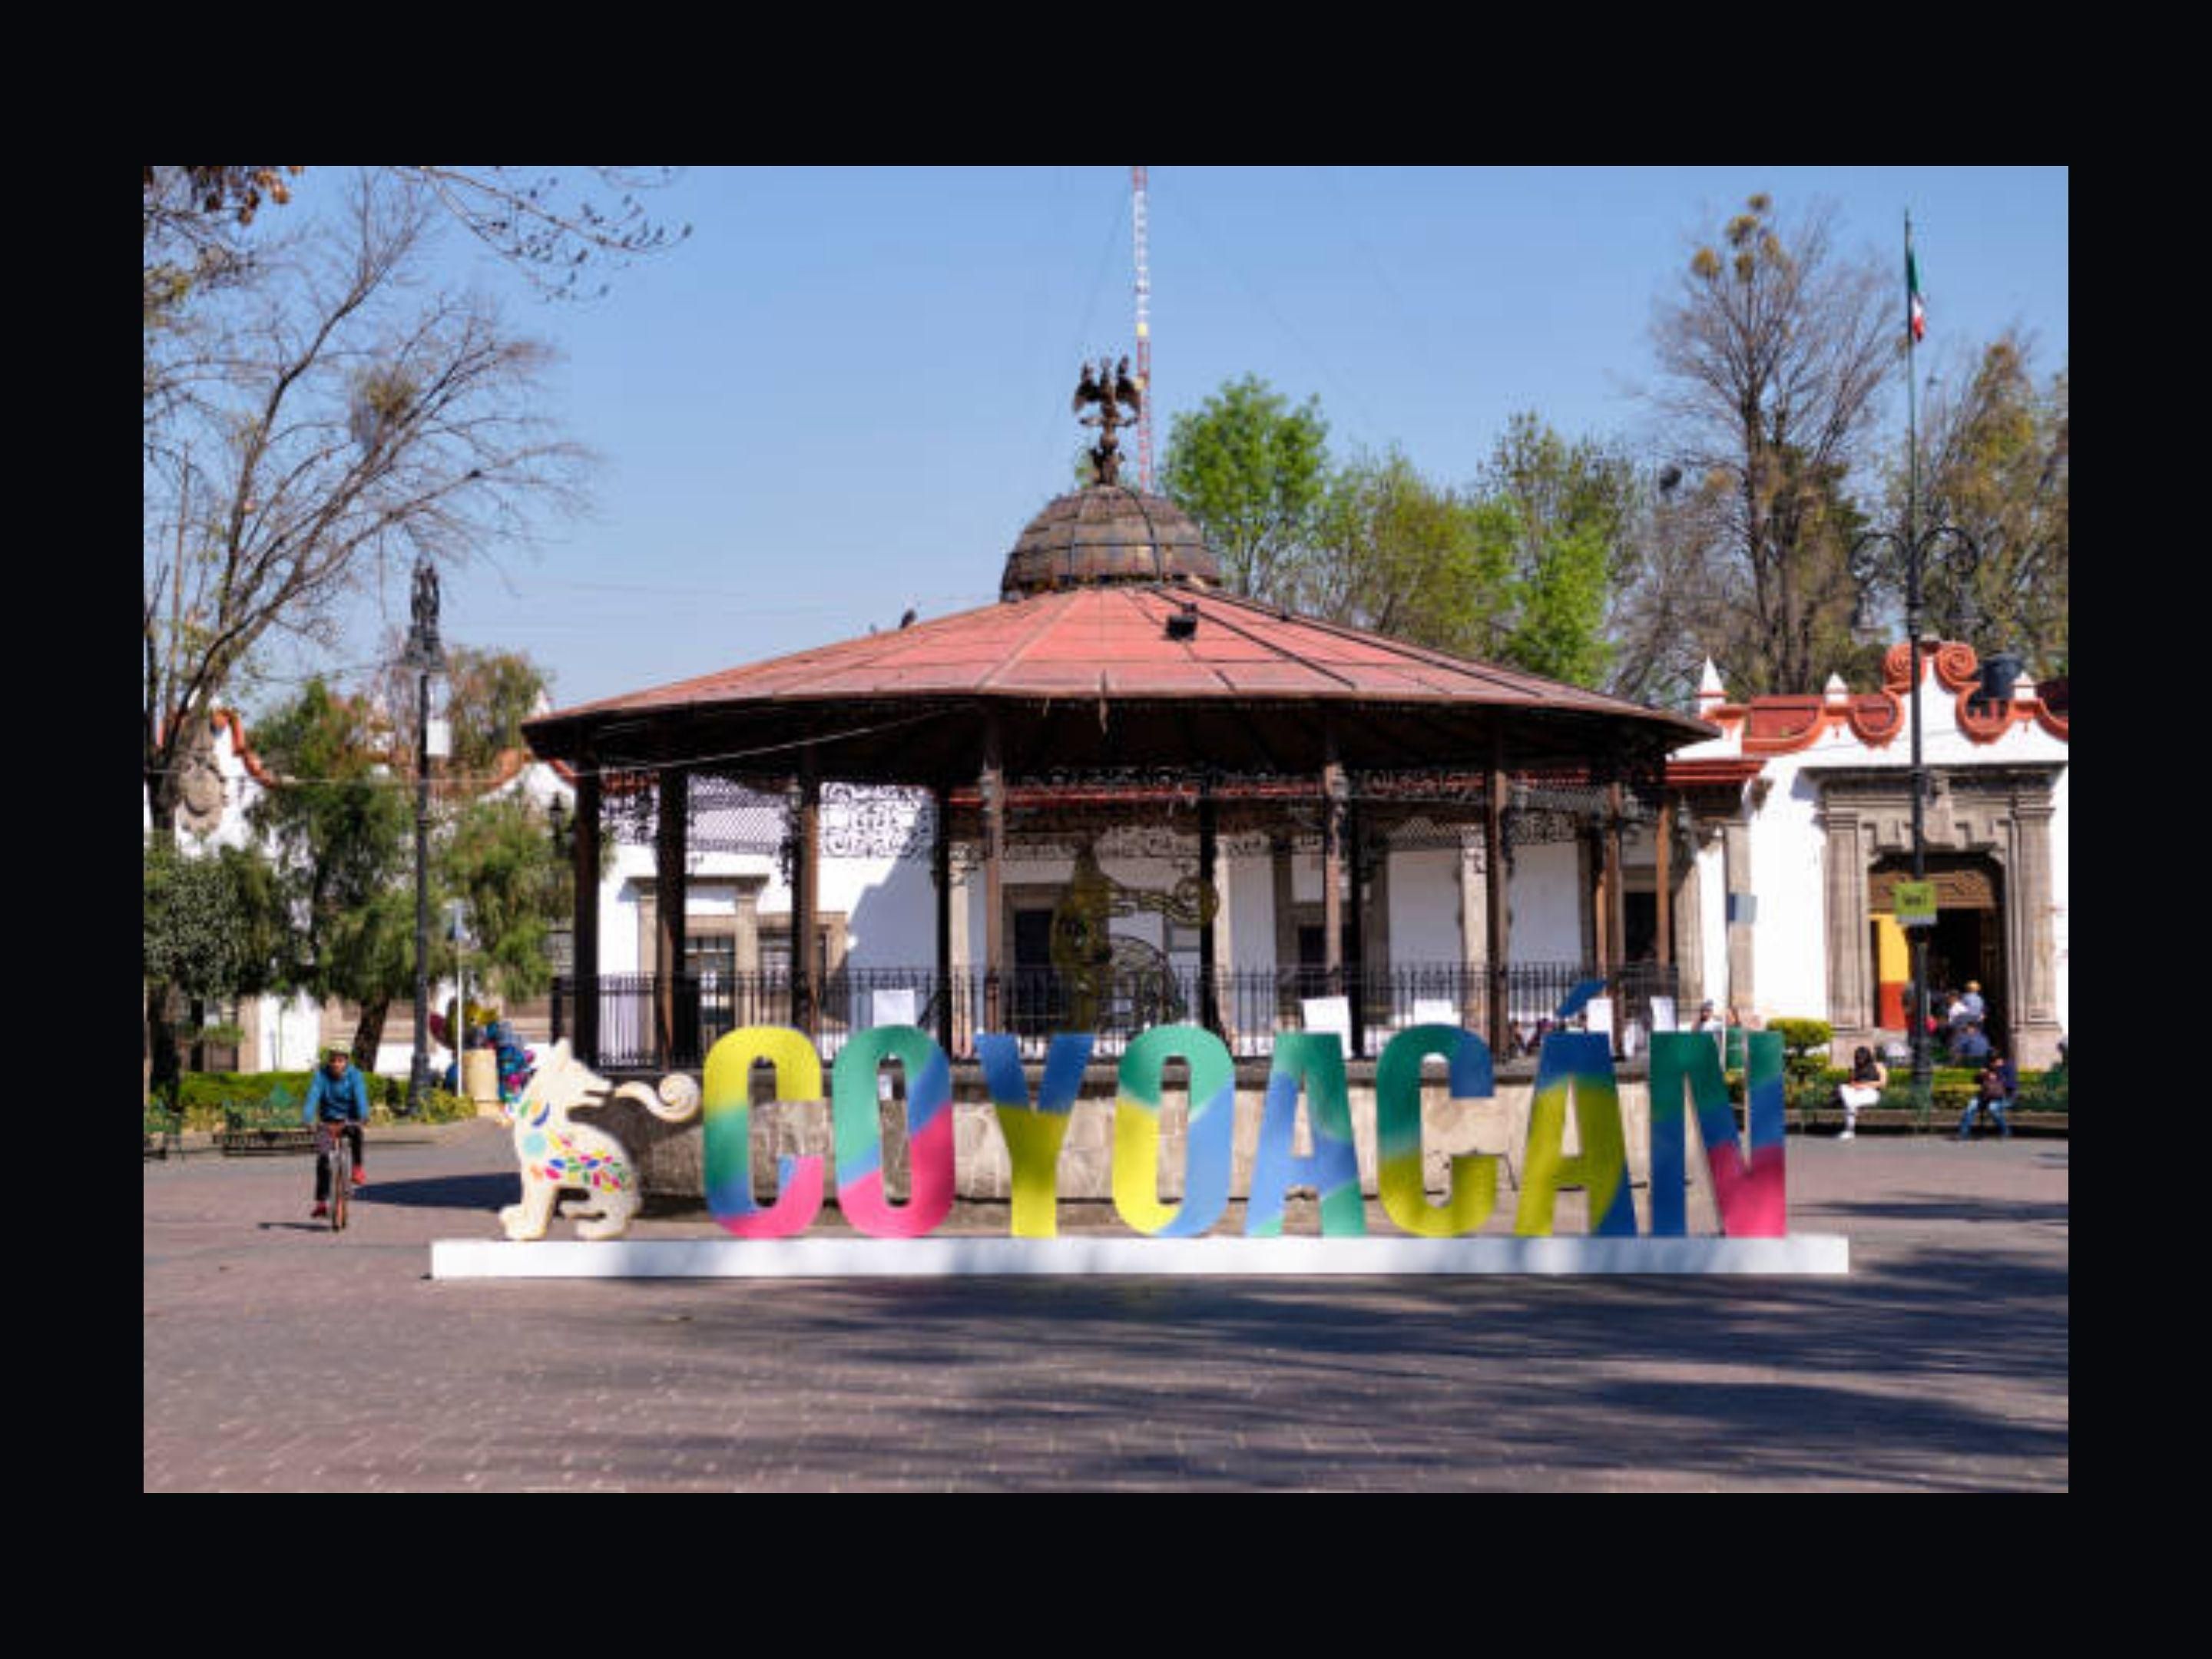 One of the most important tourist centers in Mexico City, known for its cobblestone streets and colonial architecture, museums such as Frida Kahlo and Casa de León Trotsky, as well as chakra studios, art galleries and colorful markets handmade. Outdoor cafes and laid-back ice cream parlors line the tree-lined streets.